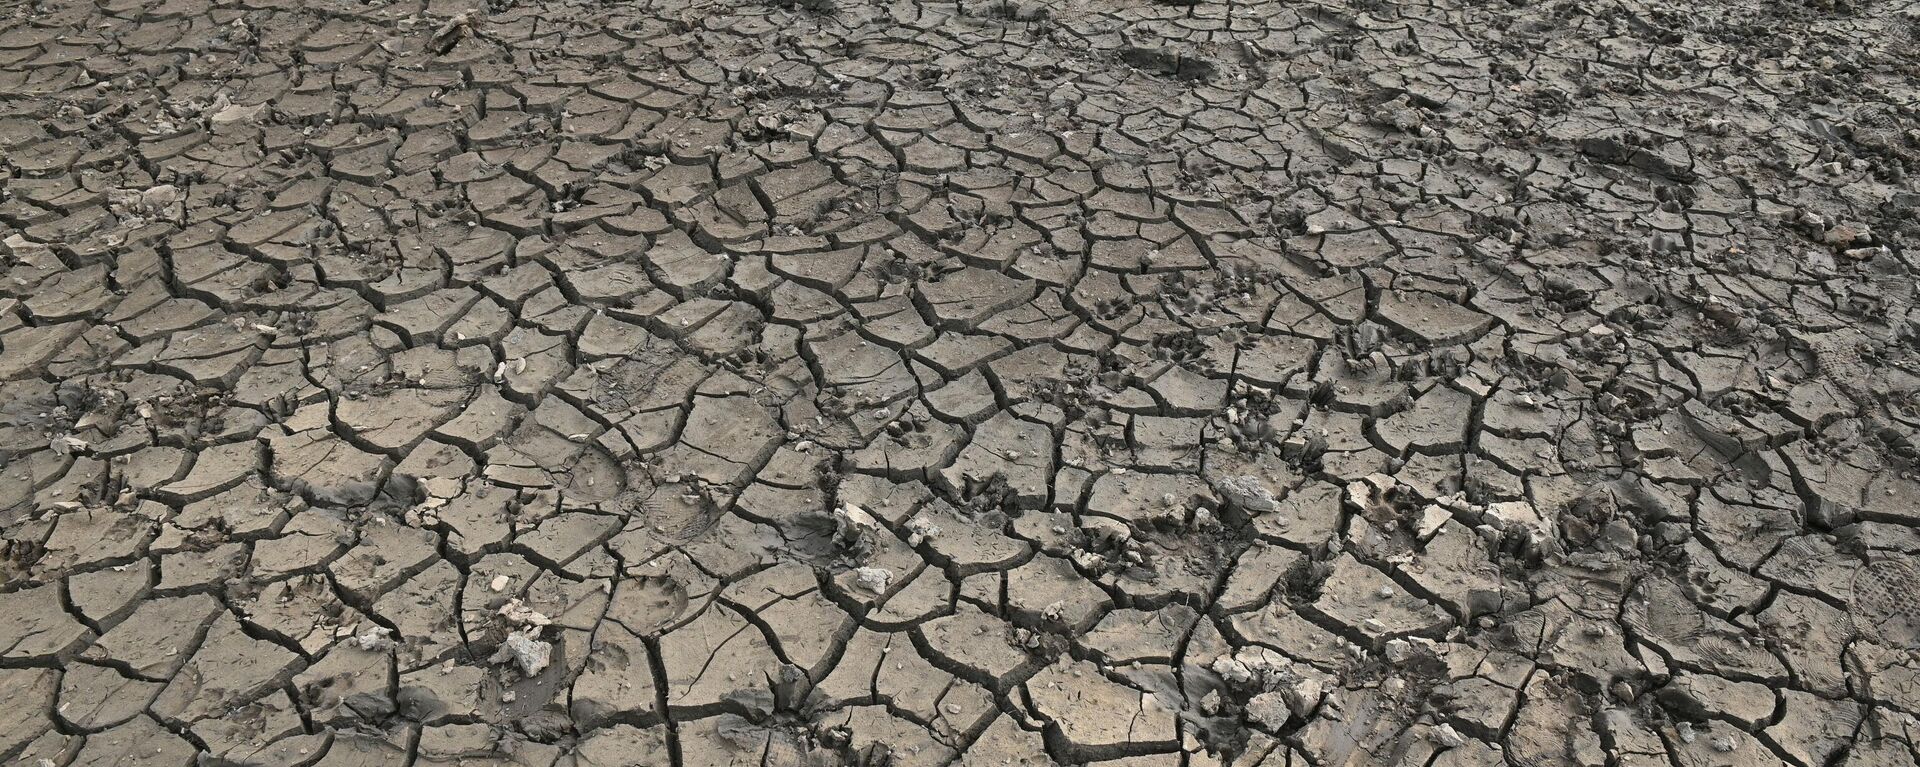 The dry, cracked bed of Scammonden Reservoir, revealed by the falling water level, is pictured west of Huddersfield, in northern England on July 17, 2022. - Sputnik International, 1920, 27.07.2022